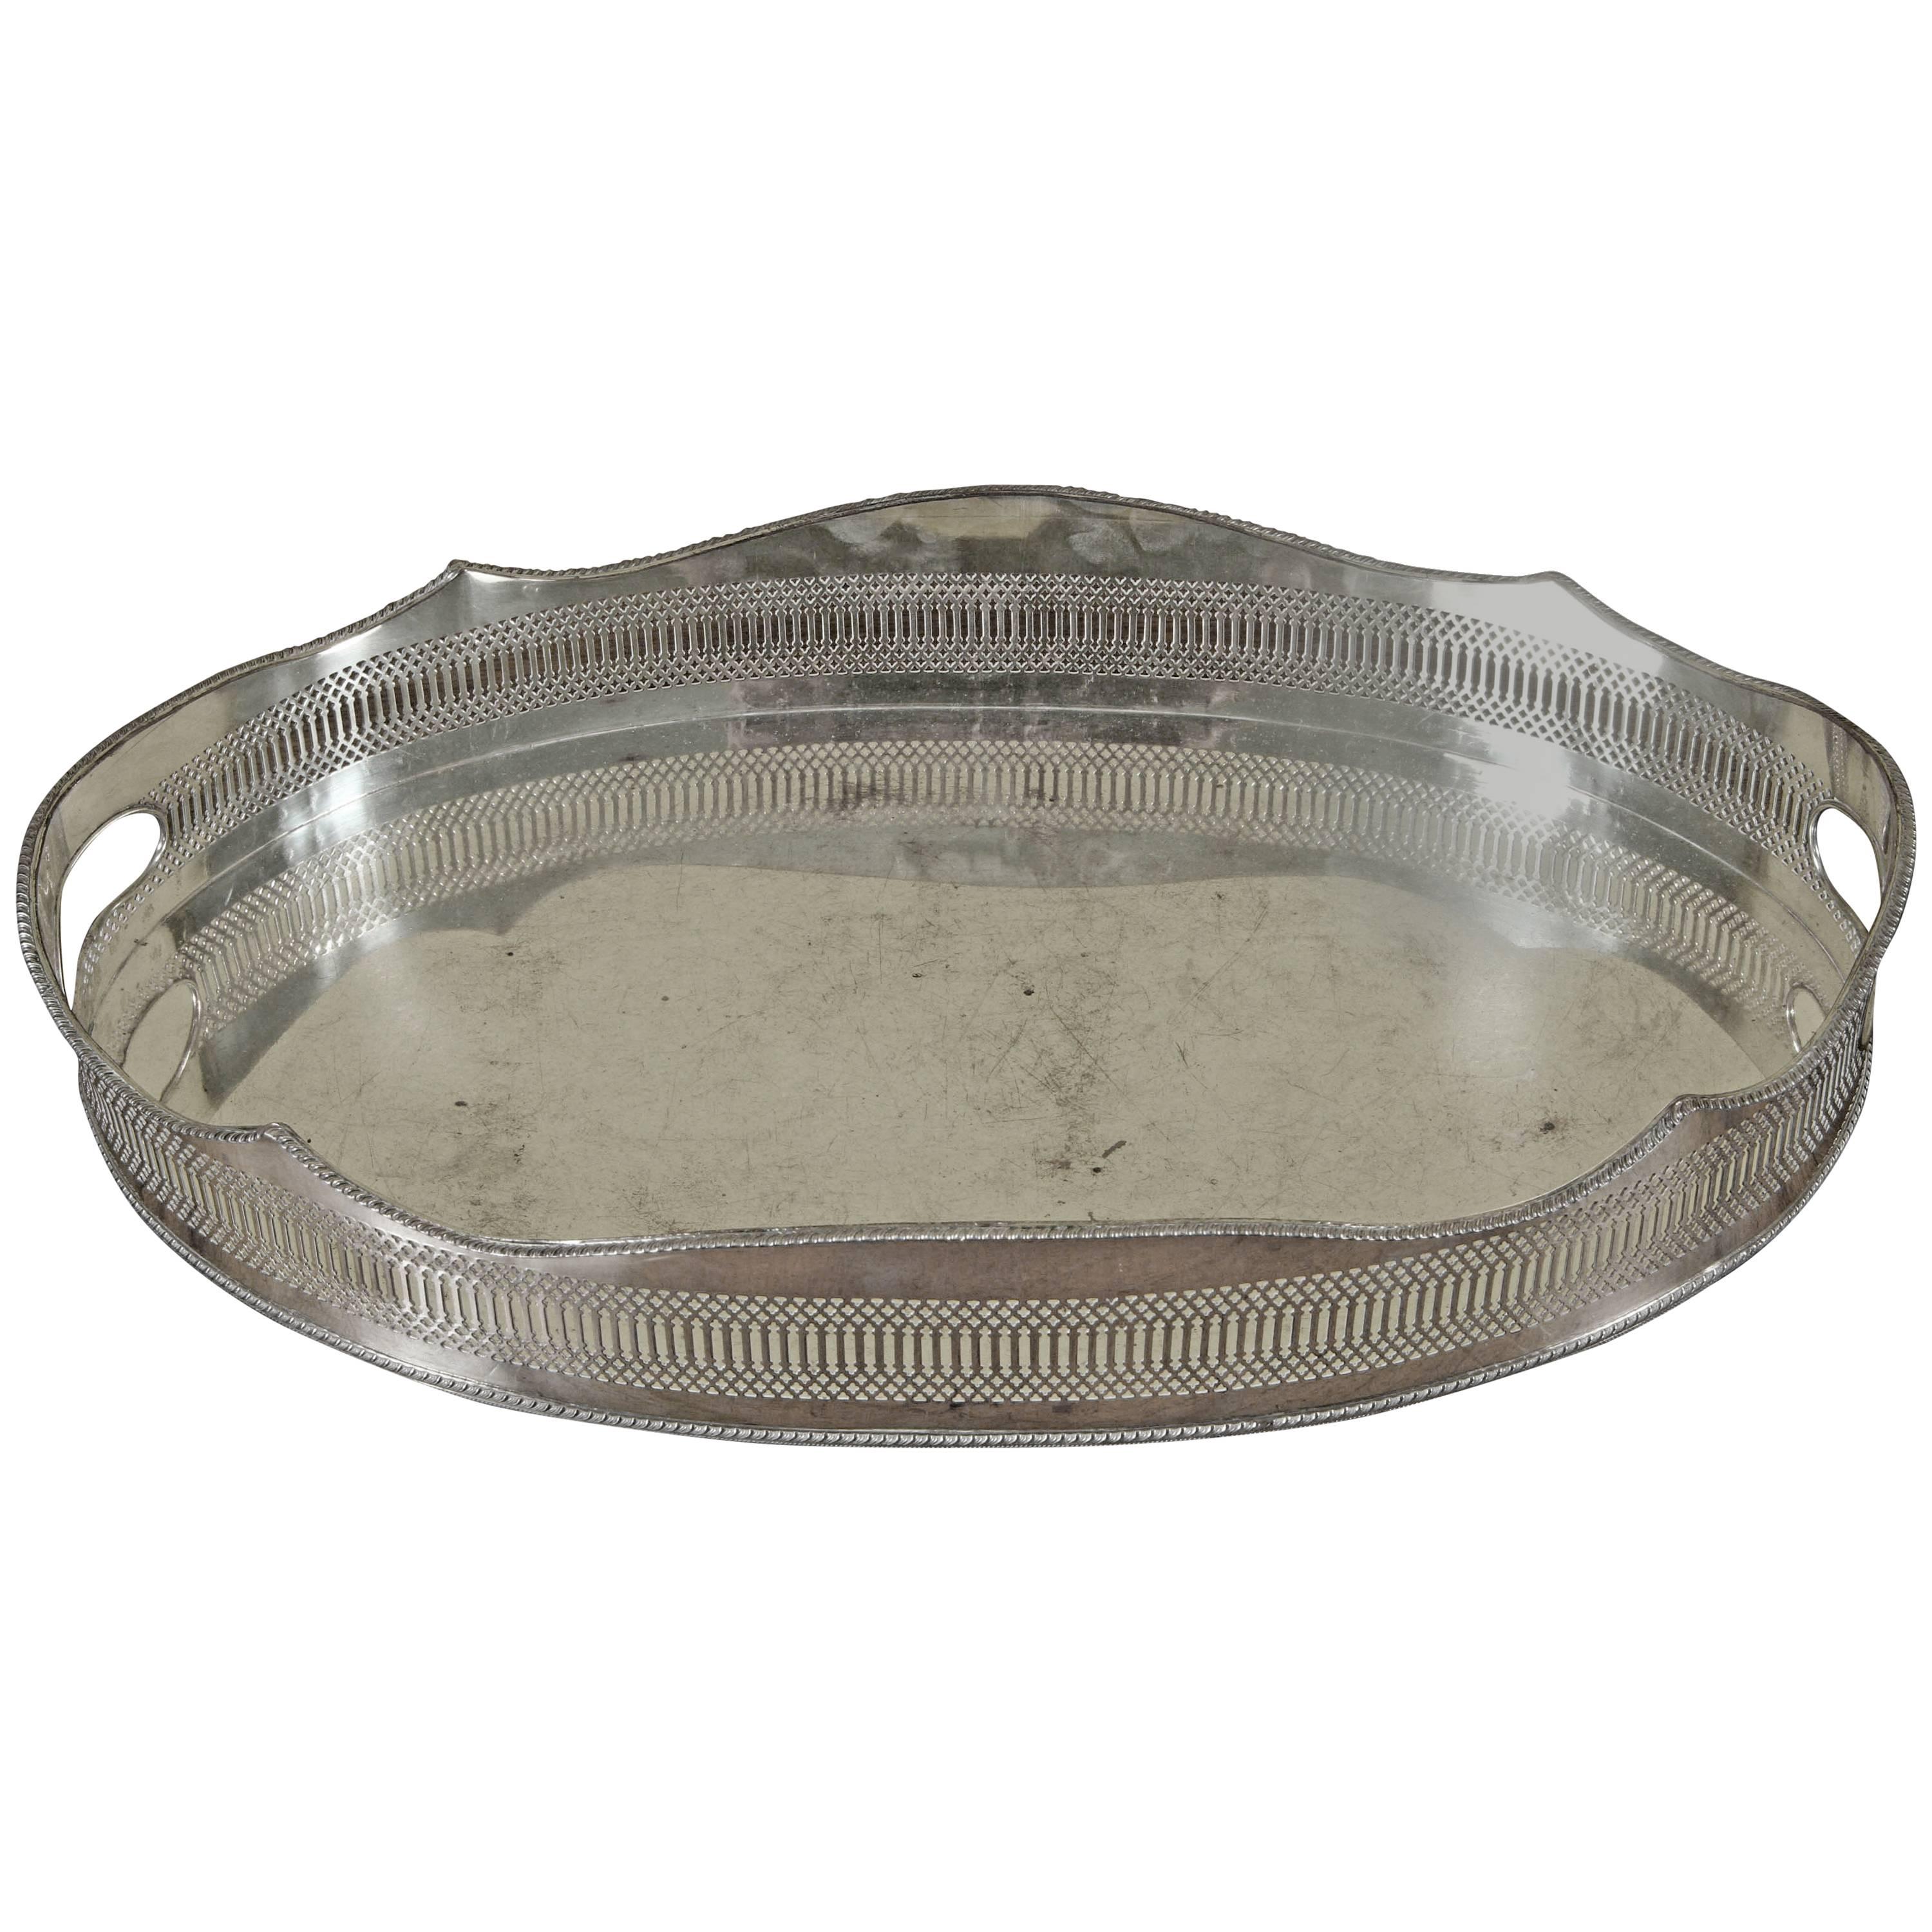 A Large Oval Early Sheffield Silver Gallery Tray with Hand-Cut Outs